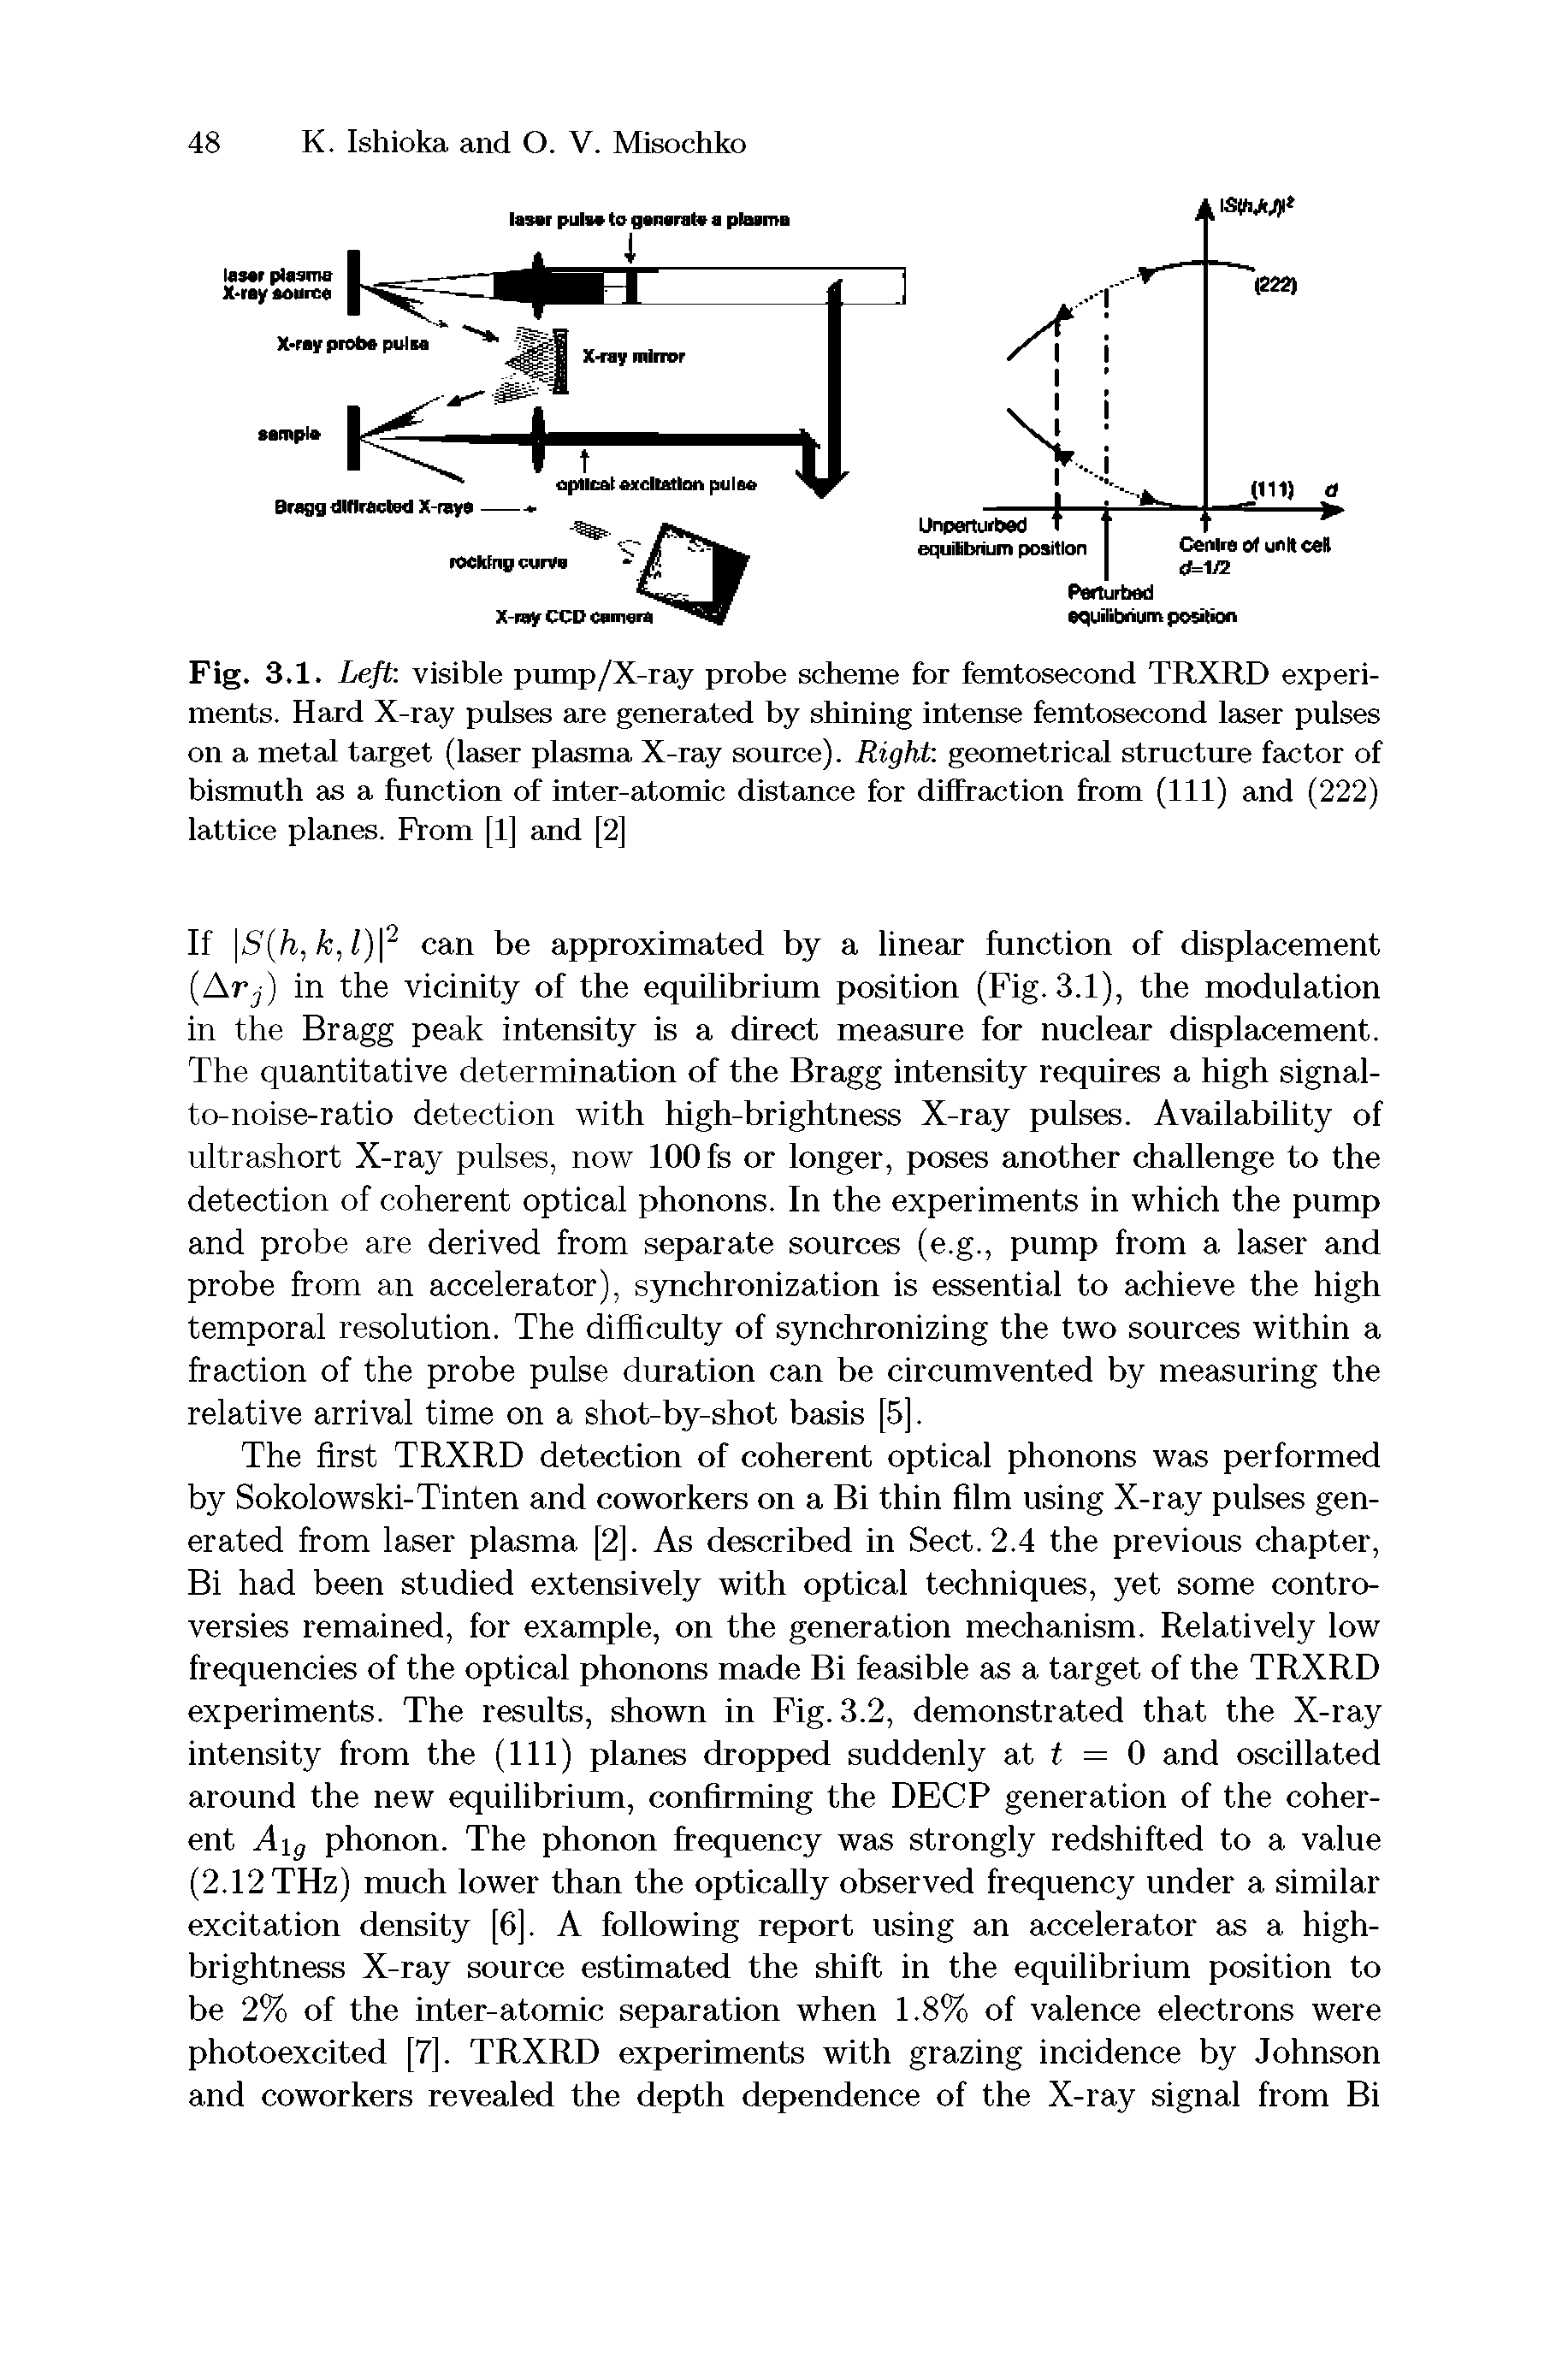 Fig. 3.1. Left visible pump/X-ray probe scheme for femtosecond TRXRD experiments. Hard X-ray pulses are generated by shining intense femtosecond laser pulses on a metal target (laser plasma X-ray source). Right geometrical structure factor of bismuth as a function of inter-atomic distance for diffraction from (111) and (222) lattice planes. From [1] and [2]...